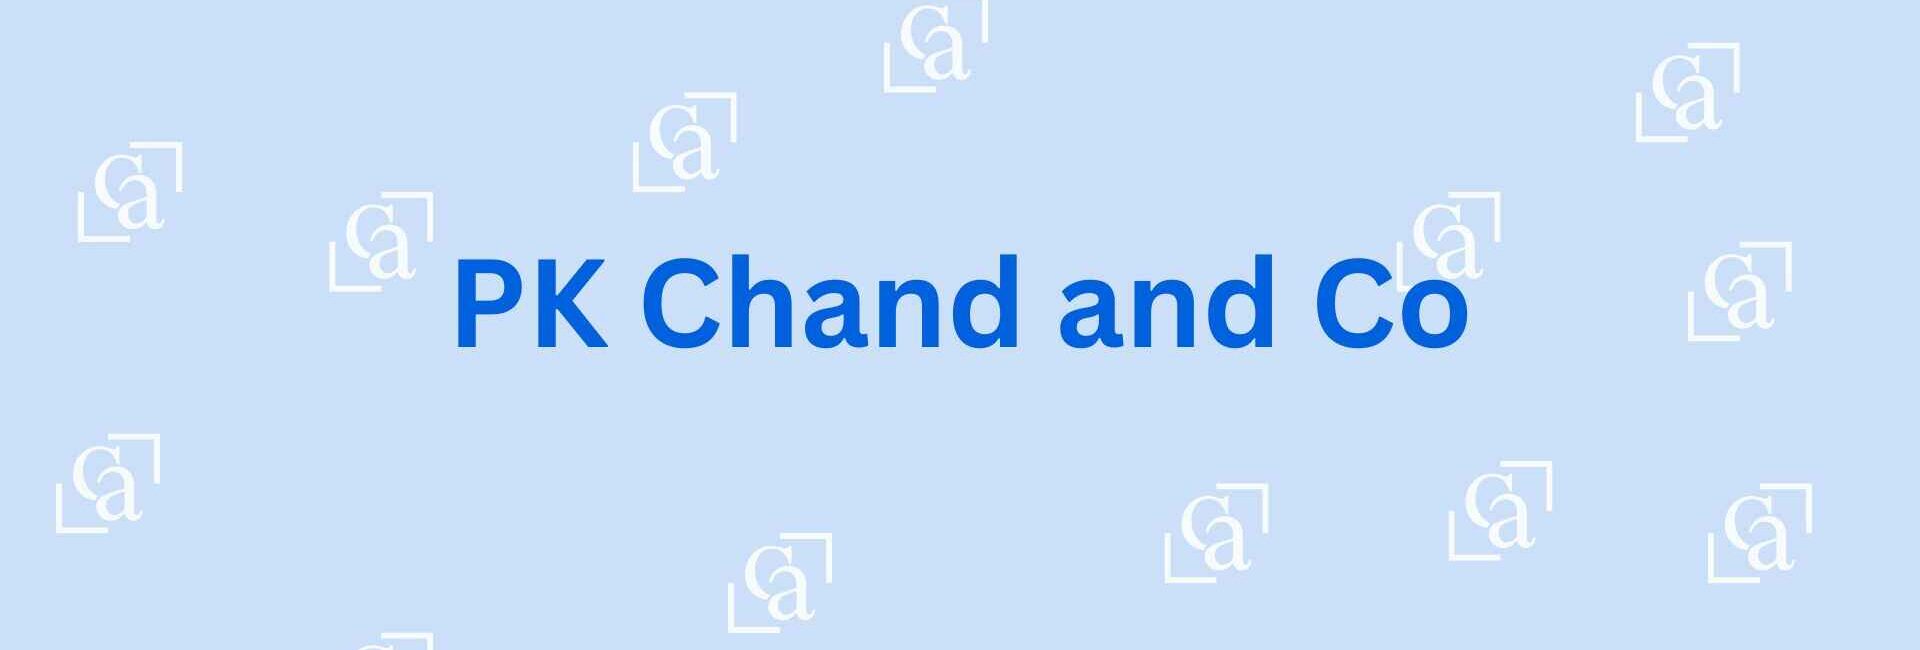 PK Chand and Co - Best Chartered accountant Noida